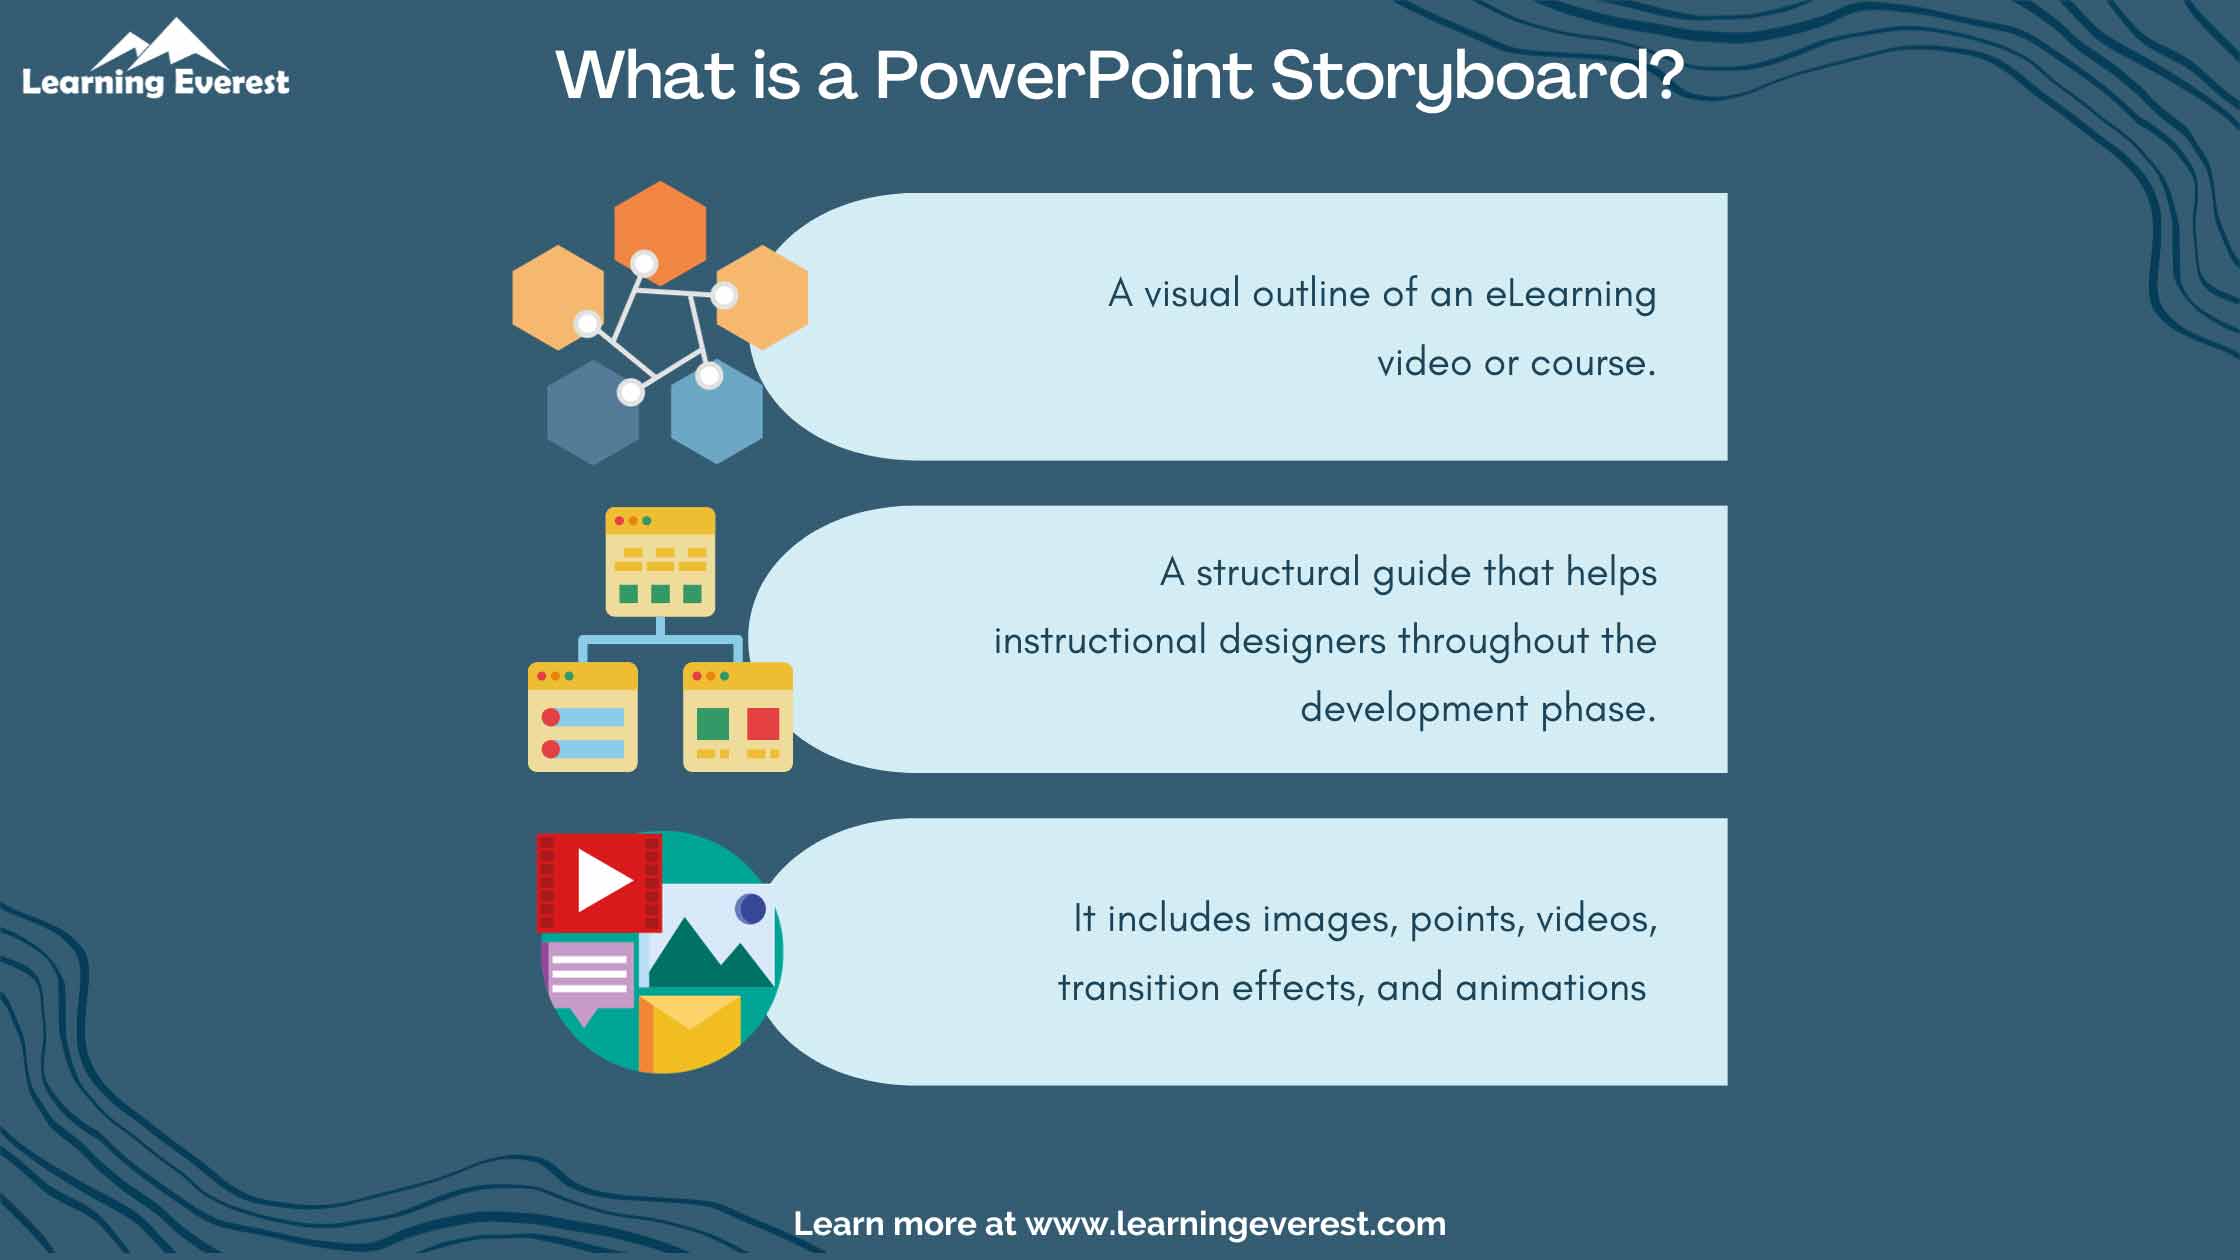 What is a PowerPoint Storyboard